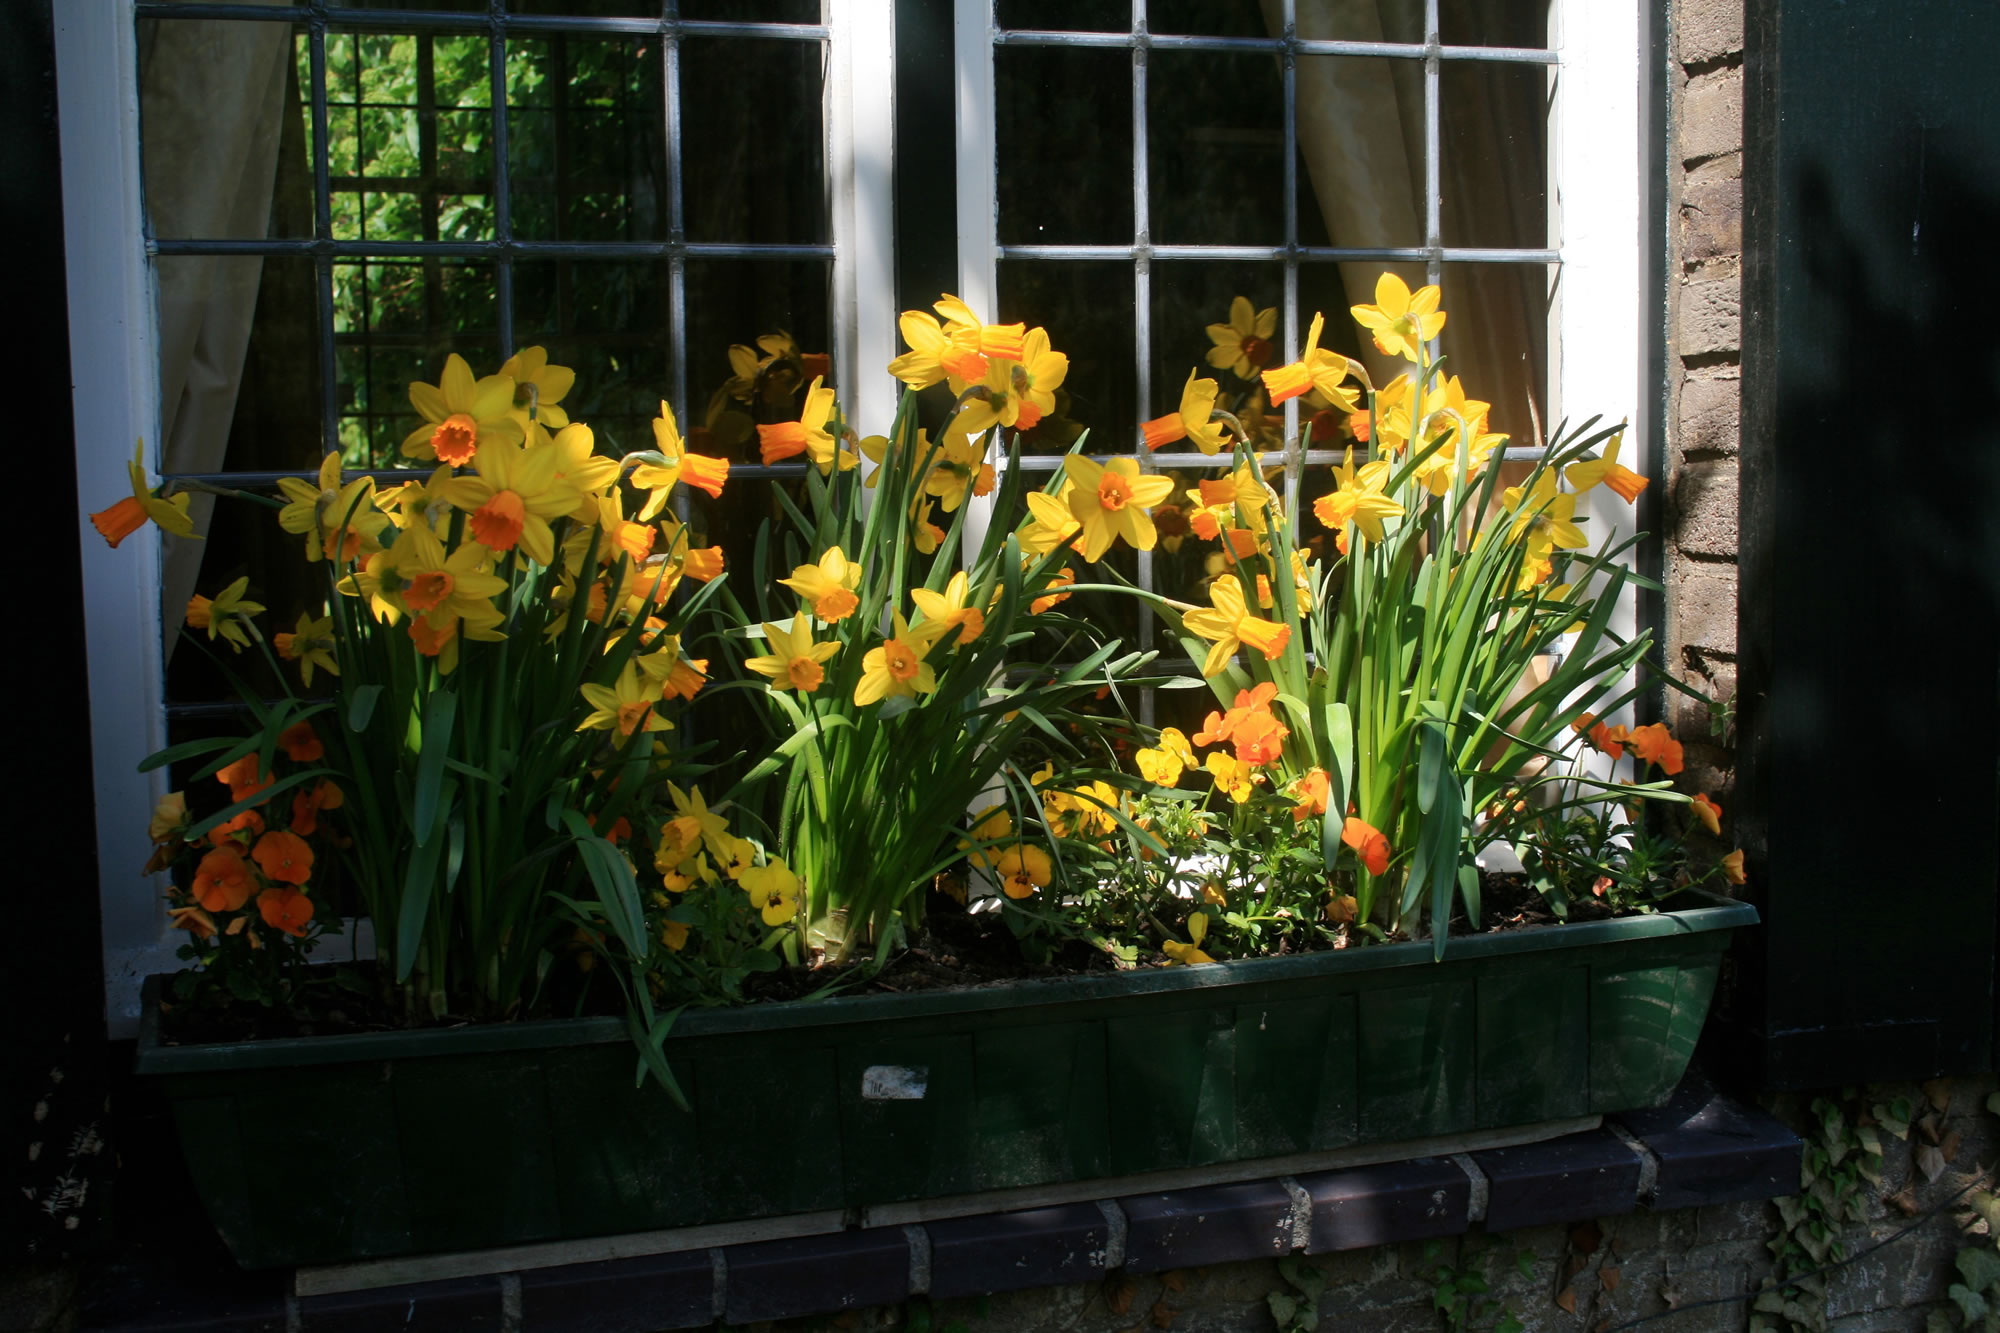 Tall and small flowers complement one another in this springtime window box assortment in Belgium.